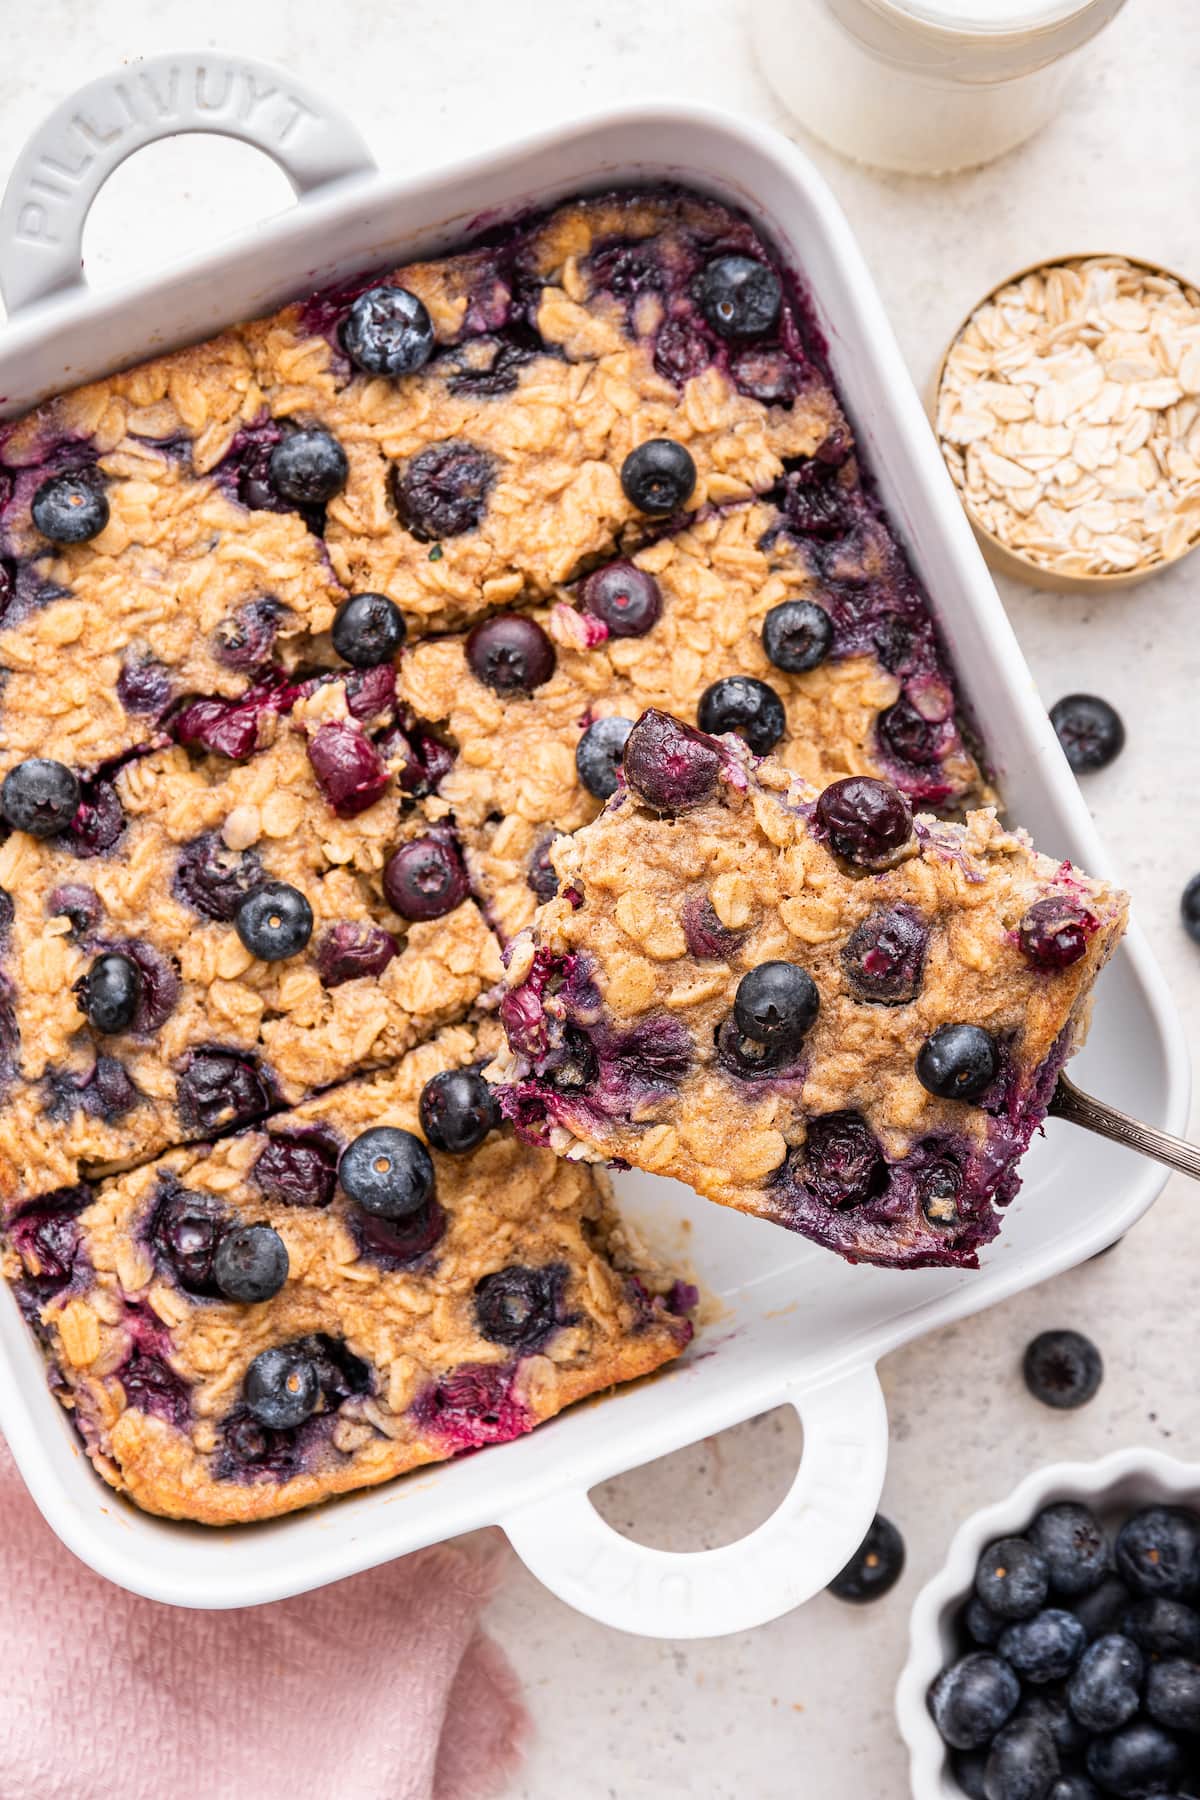 A serving of blueberry baked oatmeal being lifted away from a square baking dish with the rest of the baked oatmeal by a fork.